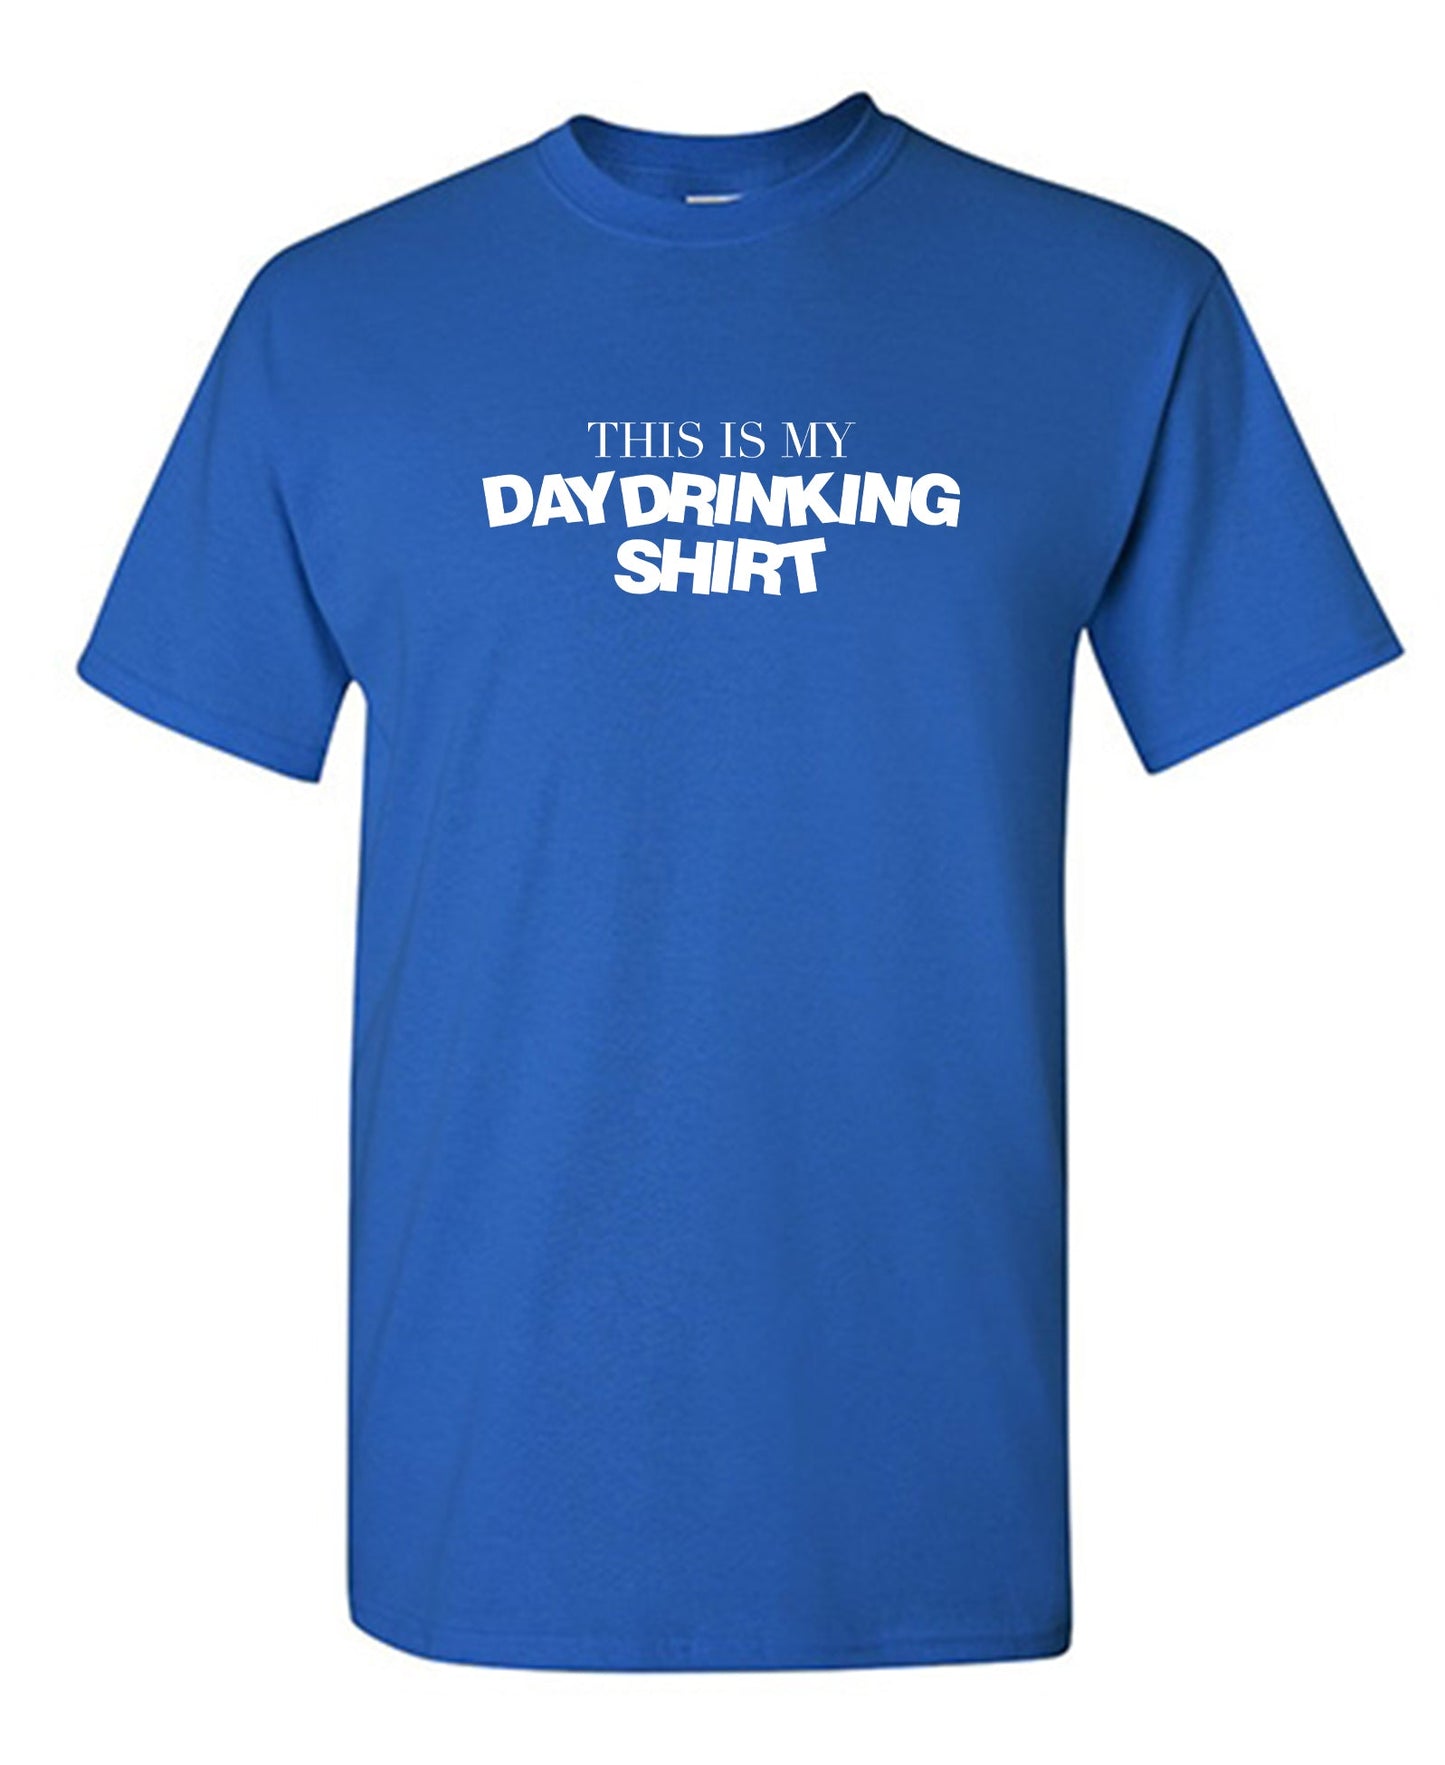 This is My Day Drinking Shirt - Funny T Shirts & Graphic Tees